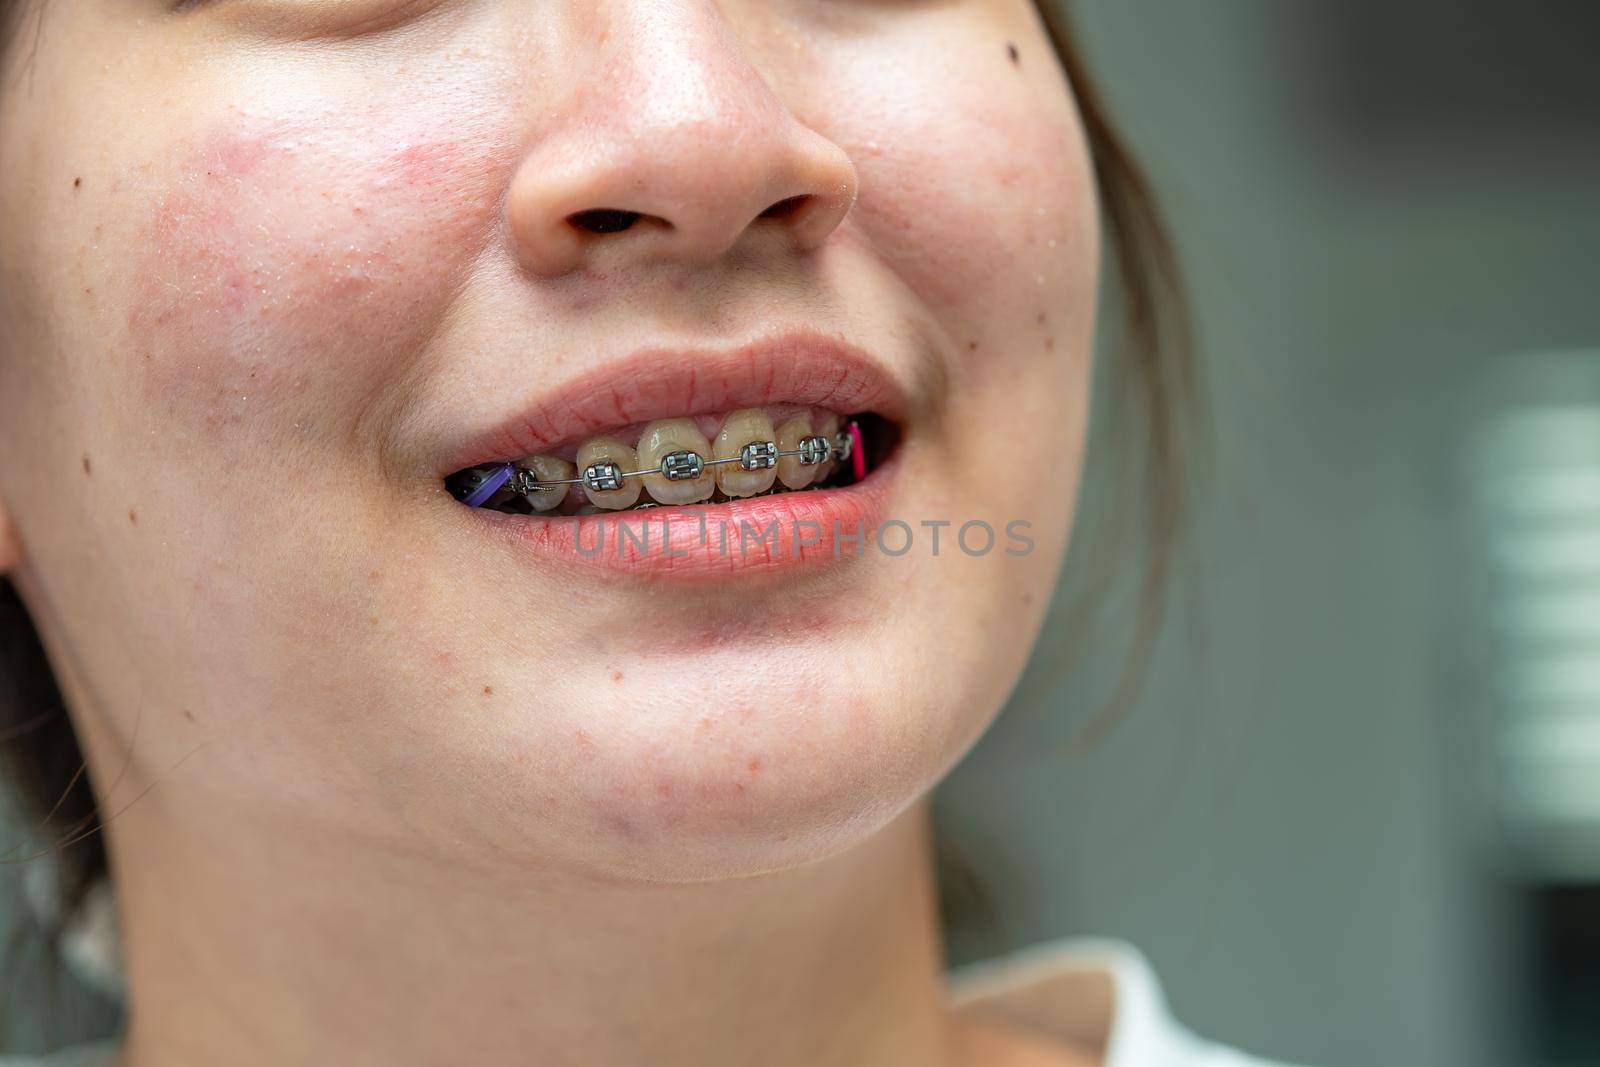 Braces in teenage girl mouth to treat and beauty for increase confidence and good personality.